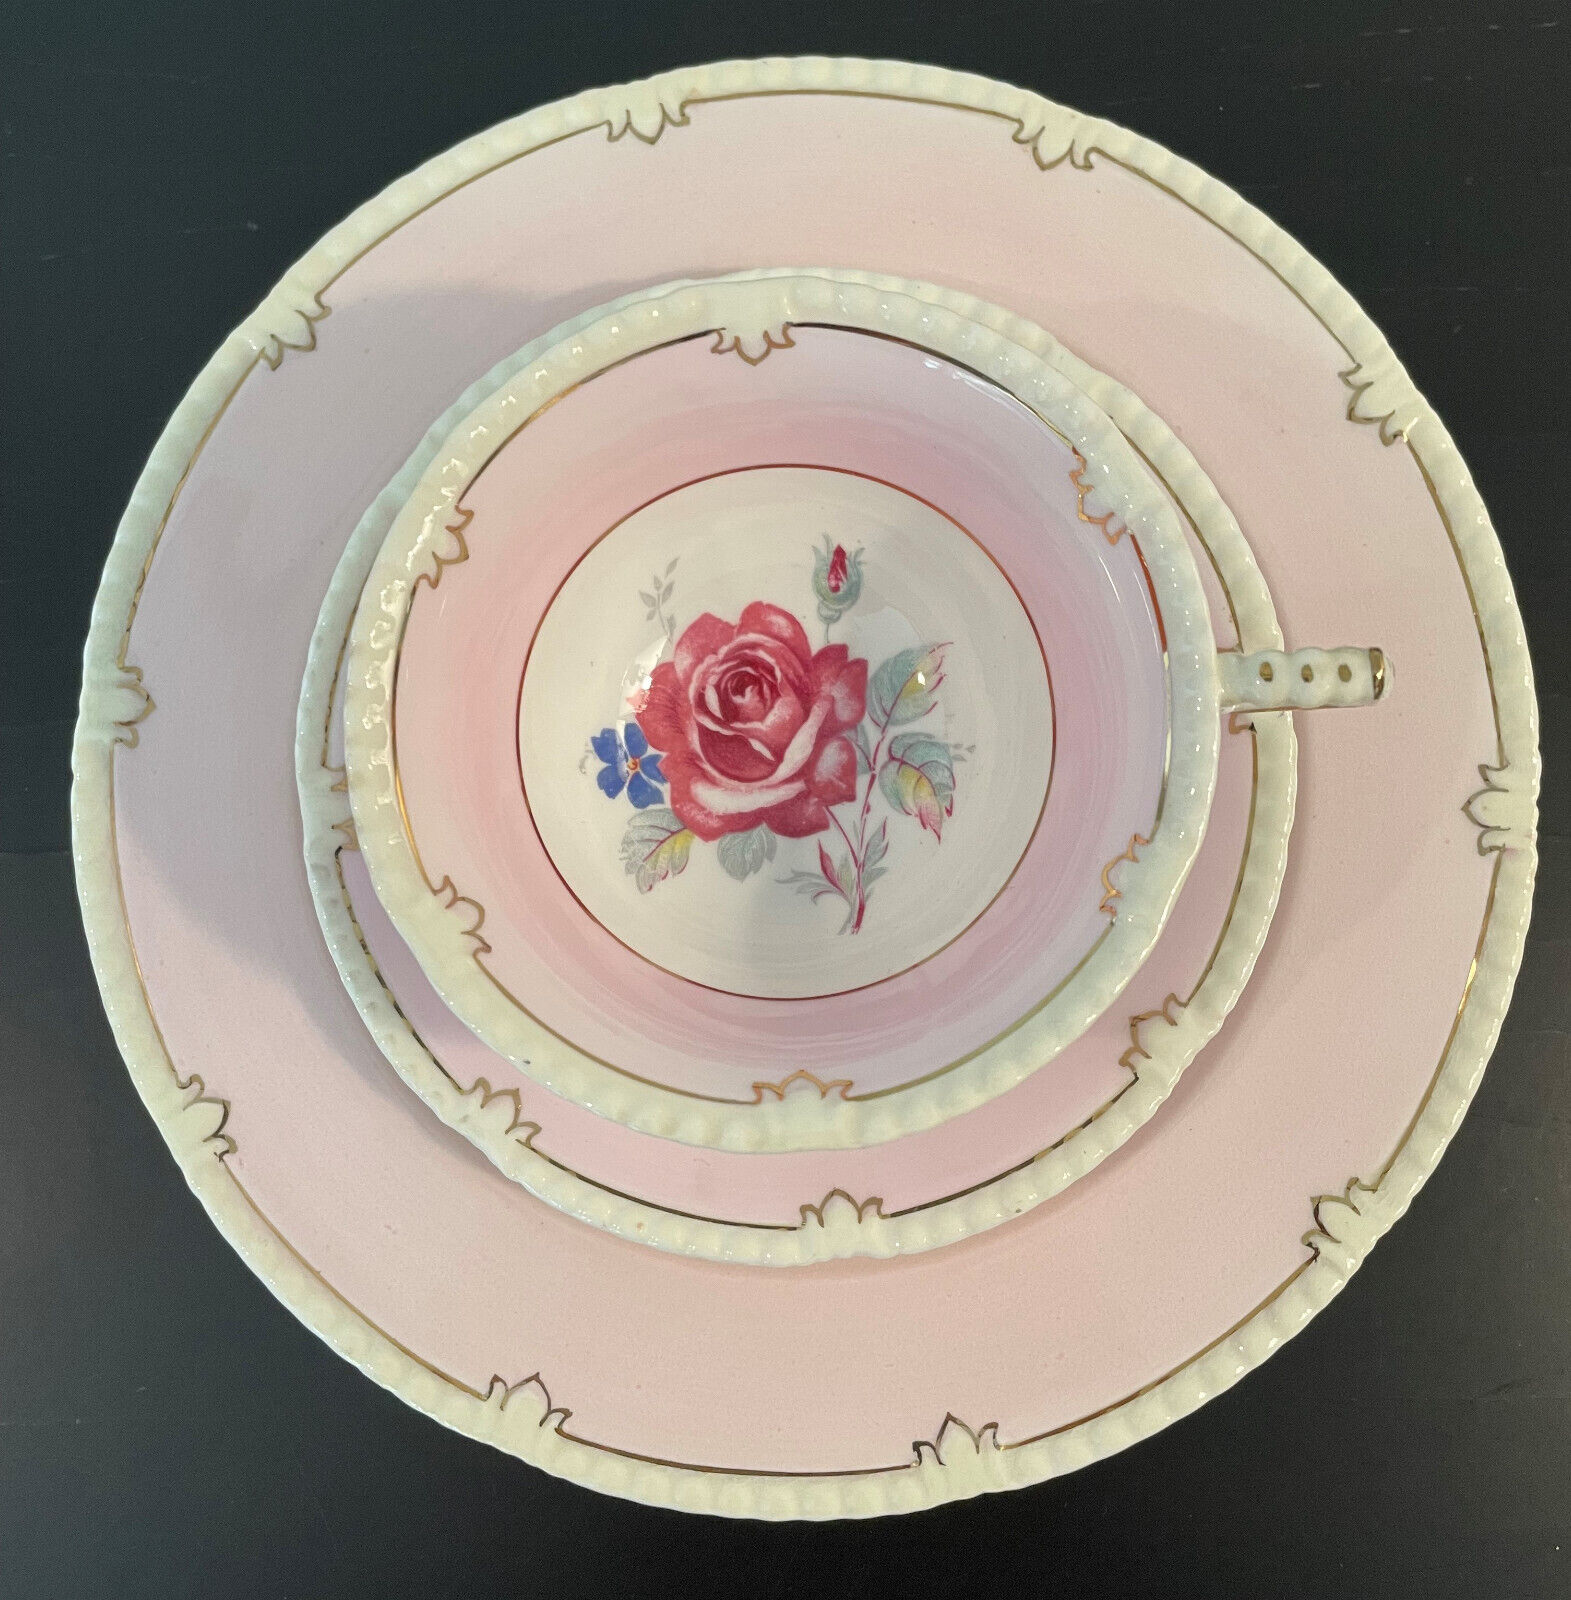 Vintage Paragon Double Warrant Tea Cup, Saucer and Plate with Rose